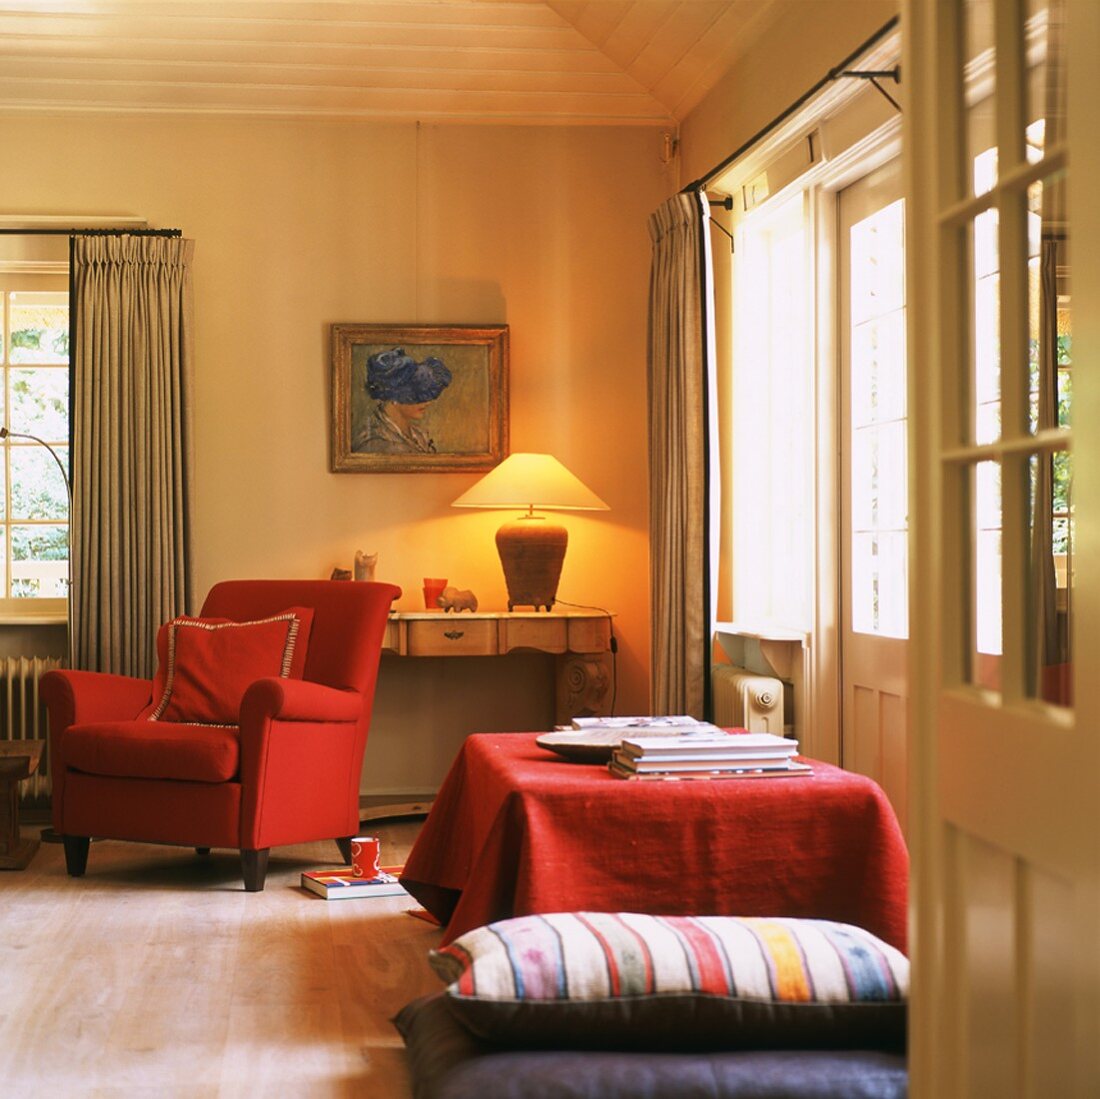 Cheerful interior with warm light from table lamp, red armchair and large floor cushions